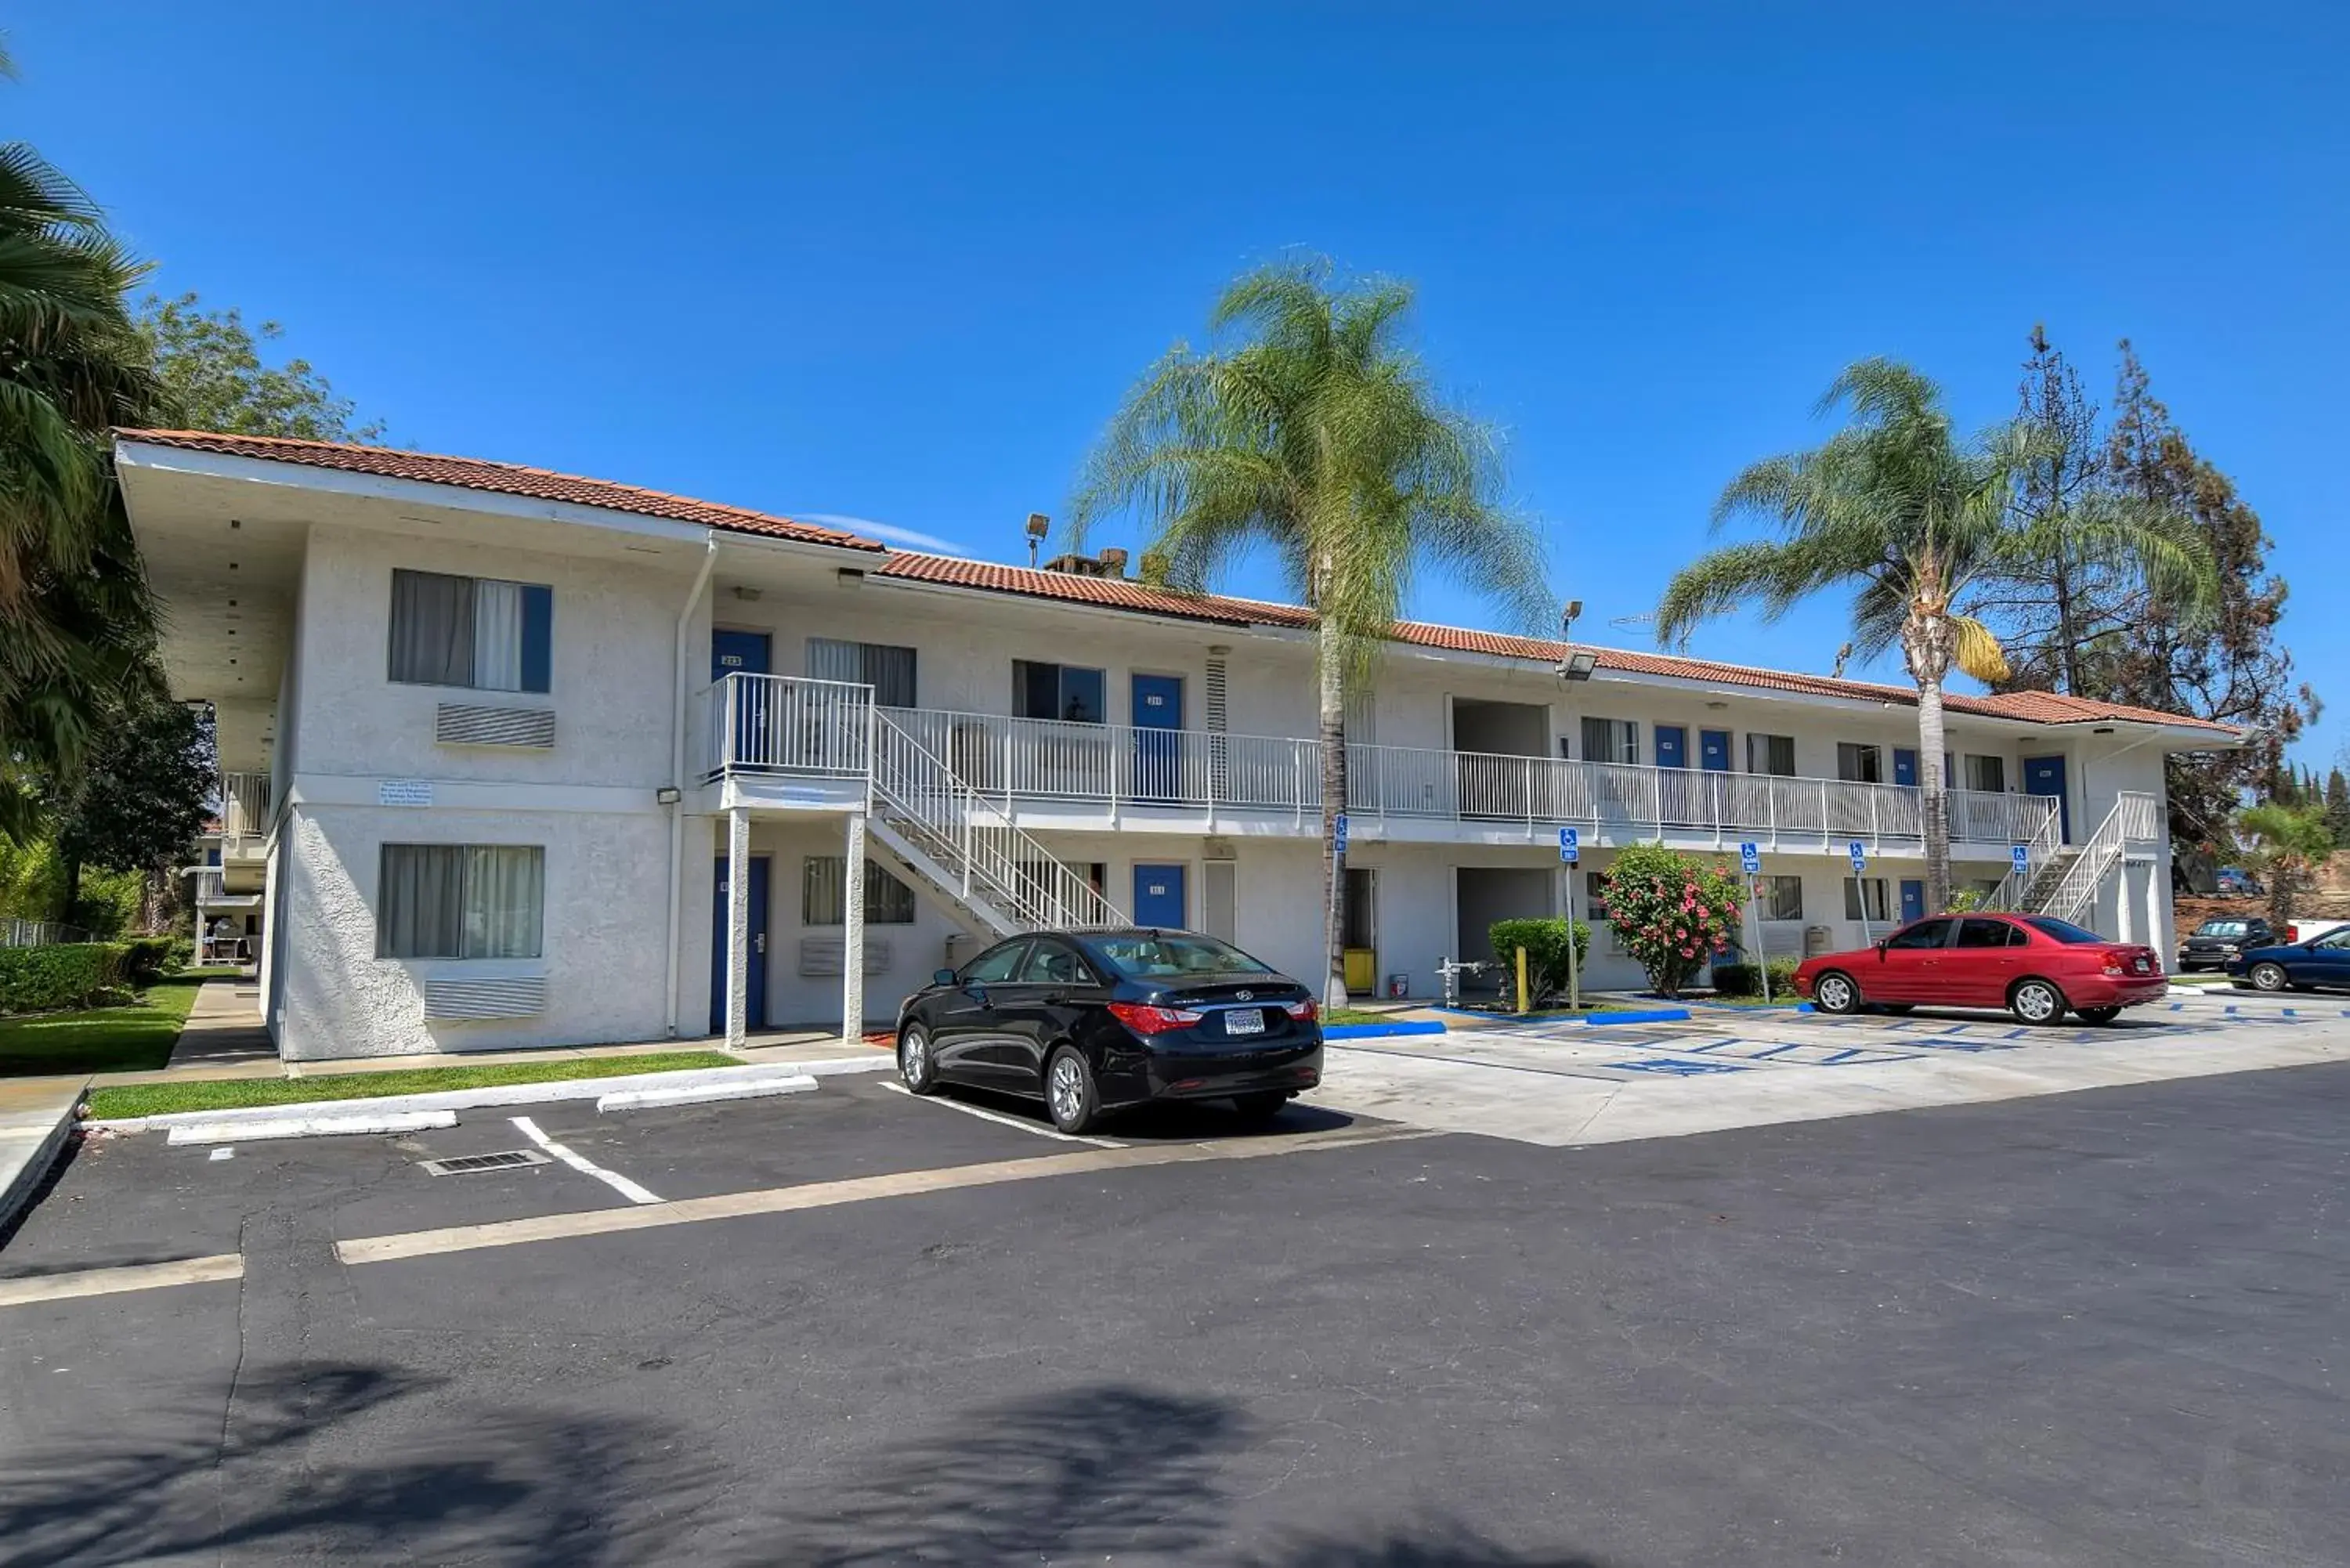 Property Building in Motel 6-Rowland Heights, CA - Los Angeles - Pomona